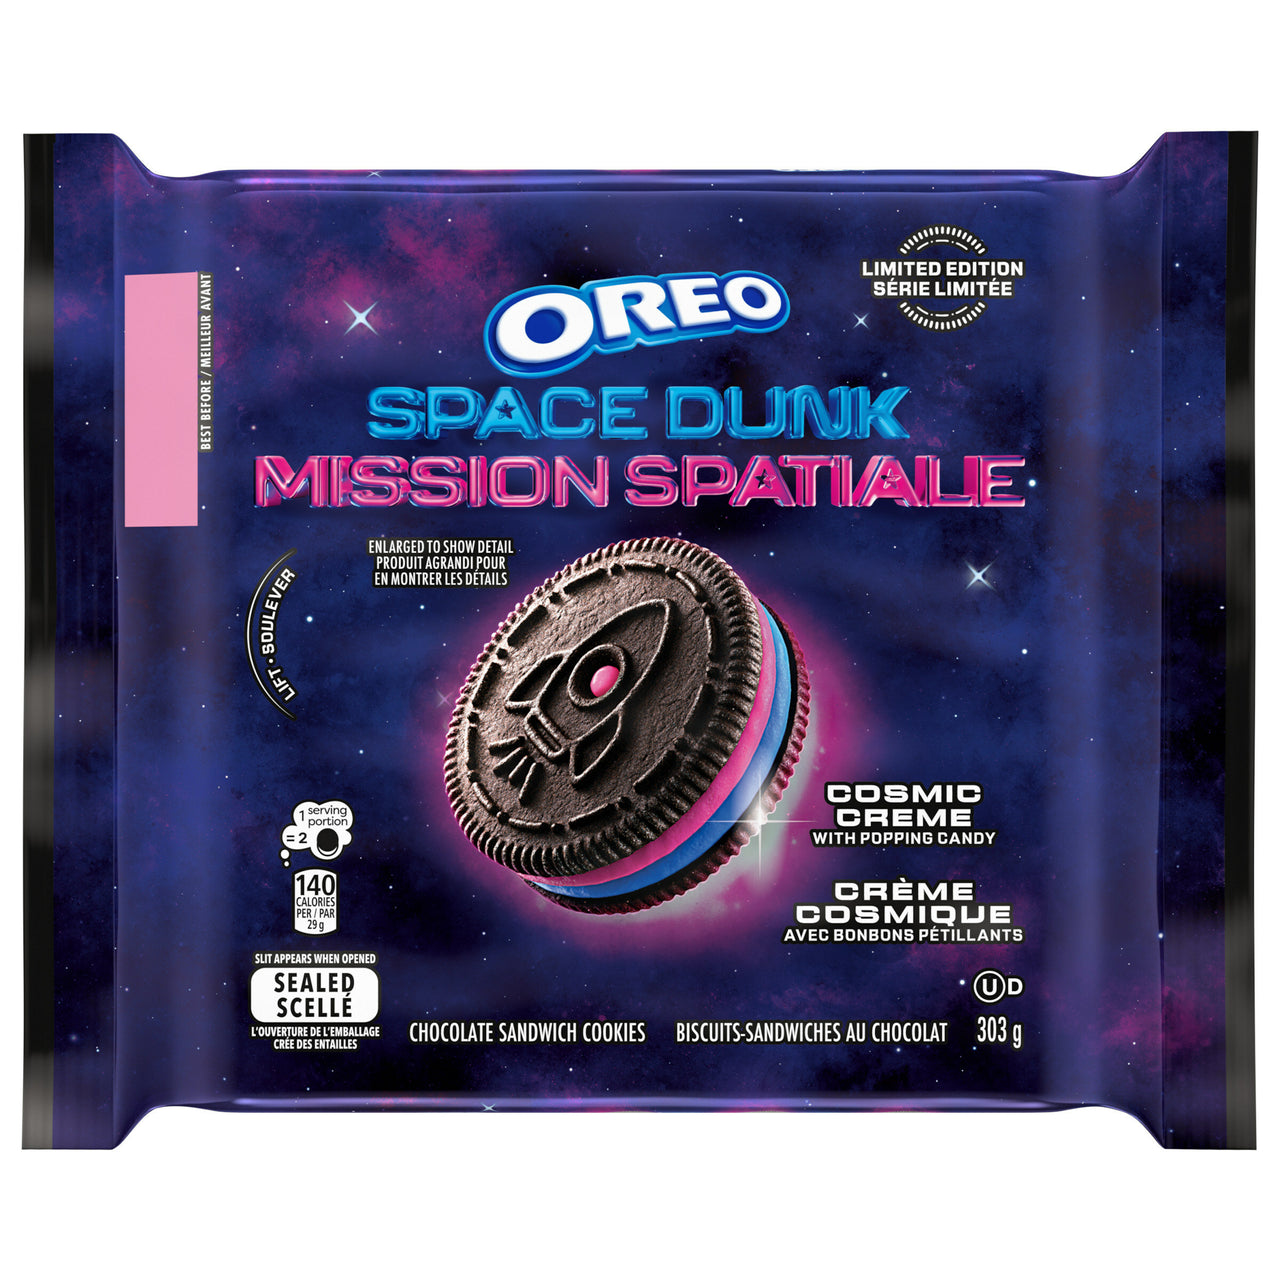 Oreo Space Dunk Mission Spatiale 303g